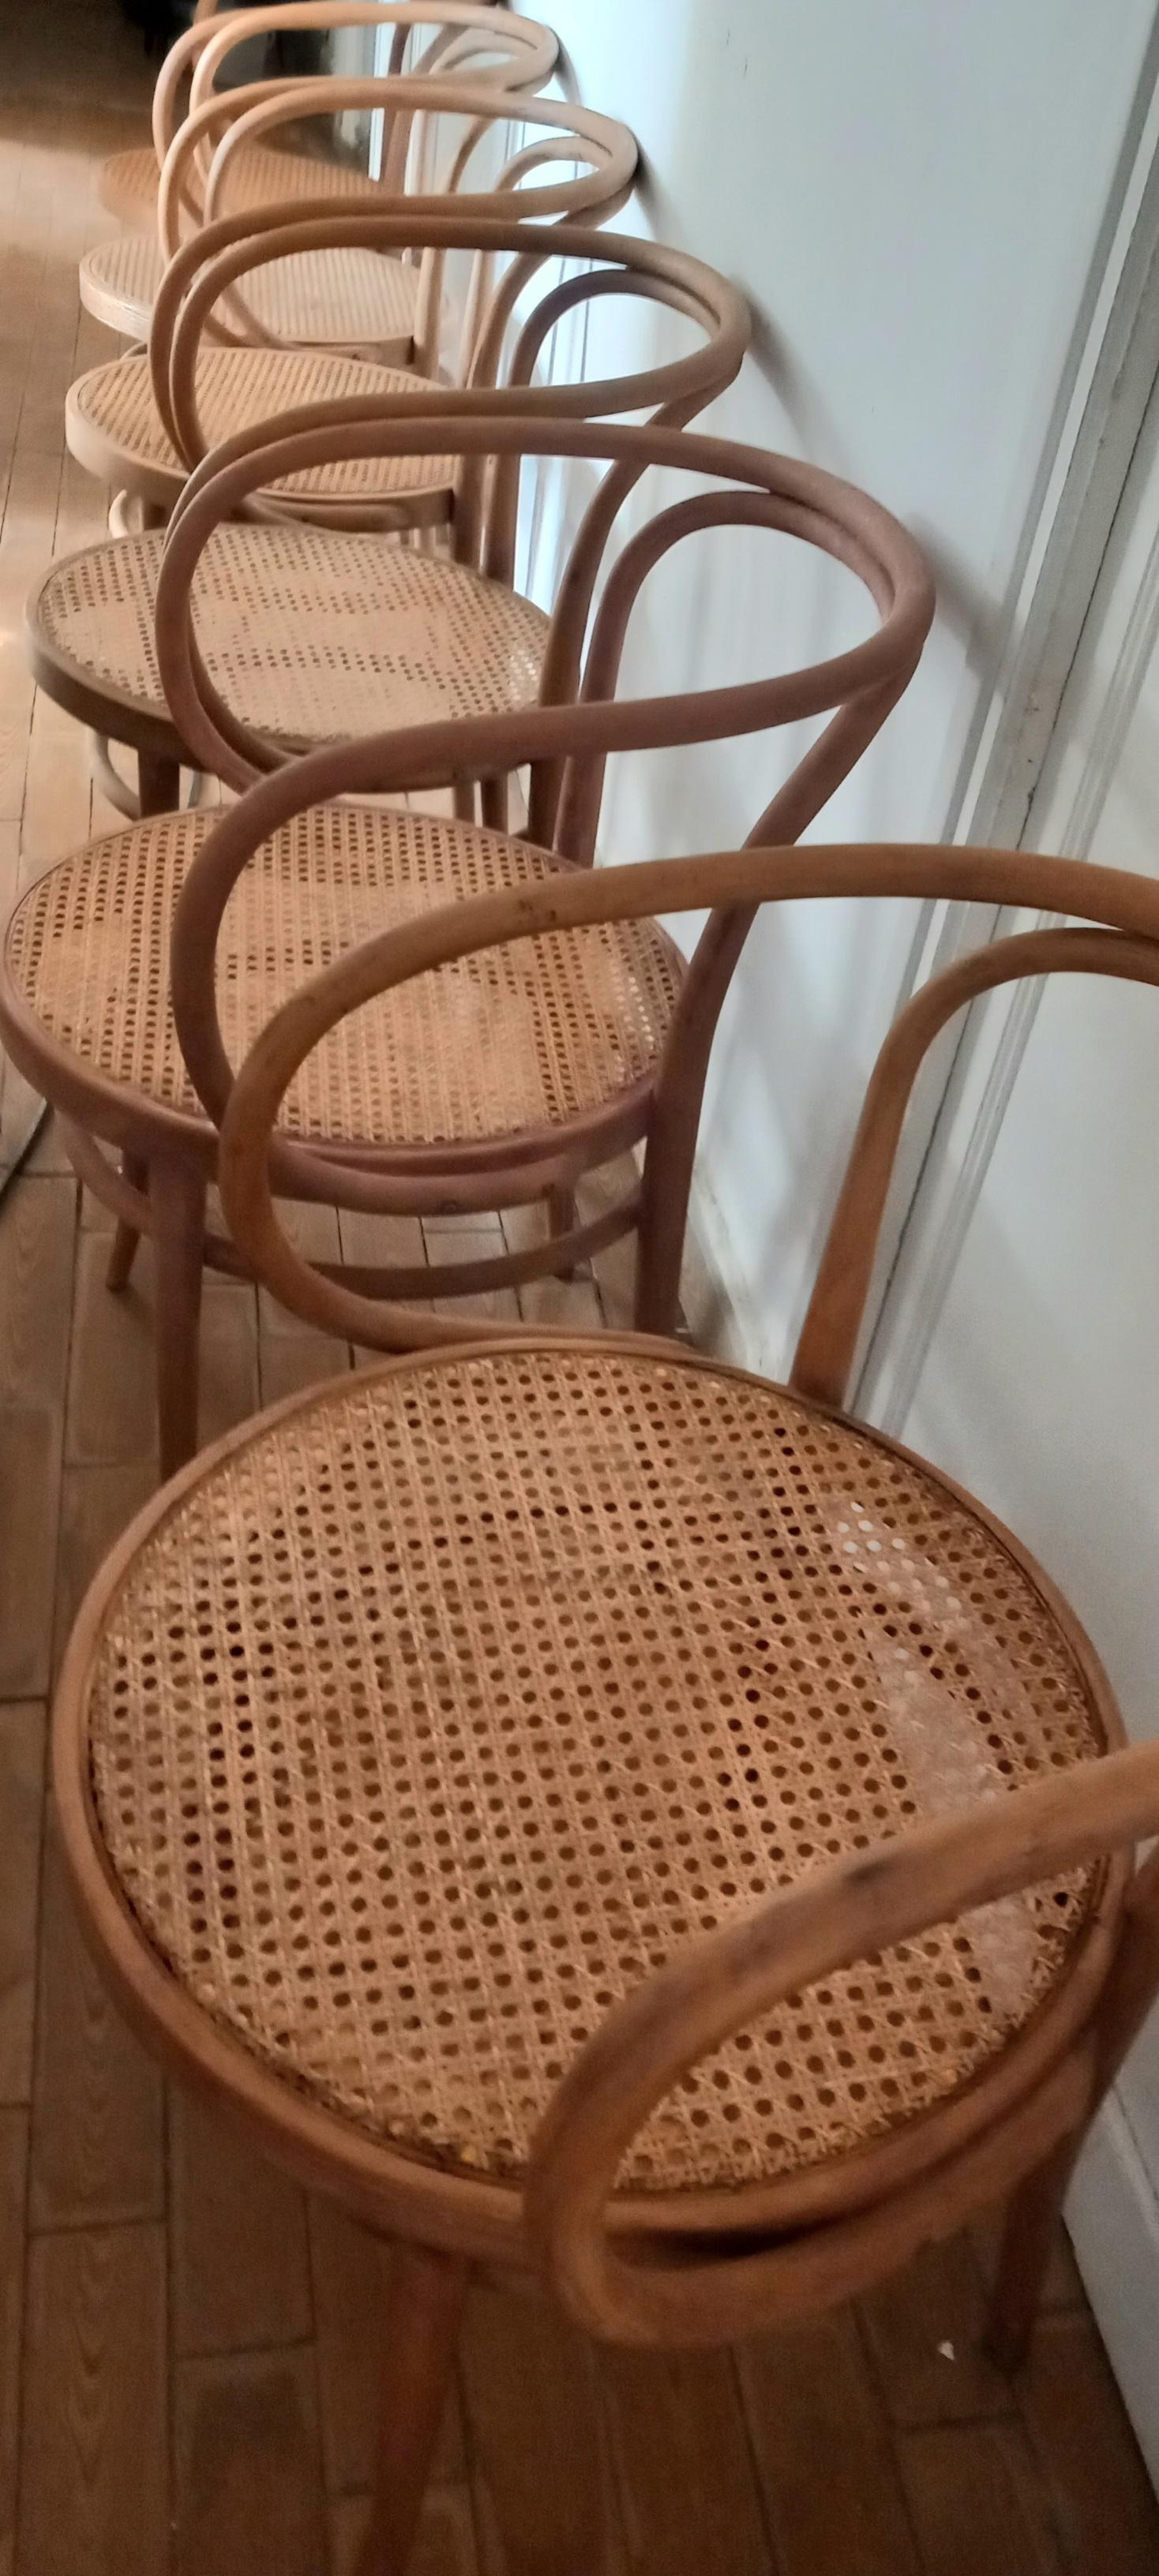 Thonet 209 Cane Bentwood Chairs After Thonet 209, 1950s For Sale 2